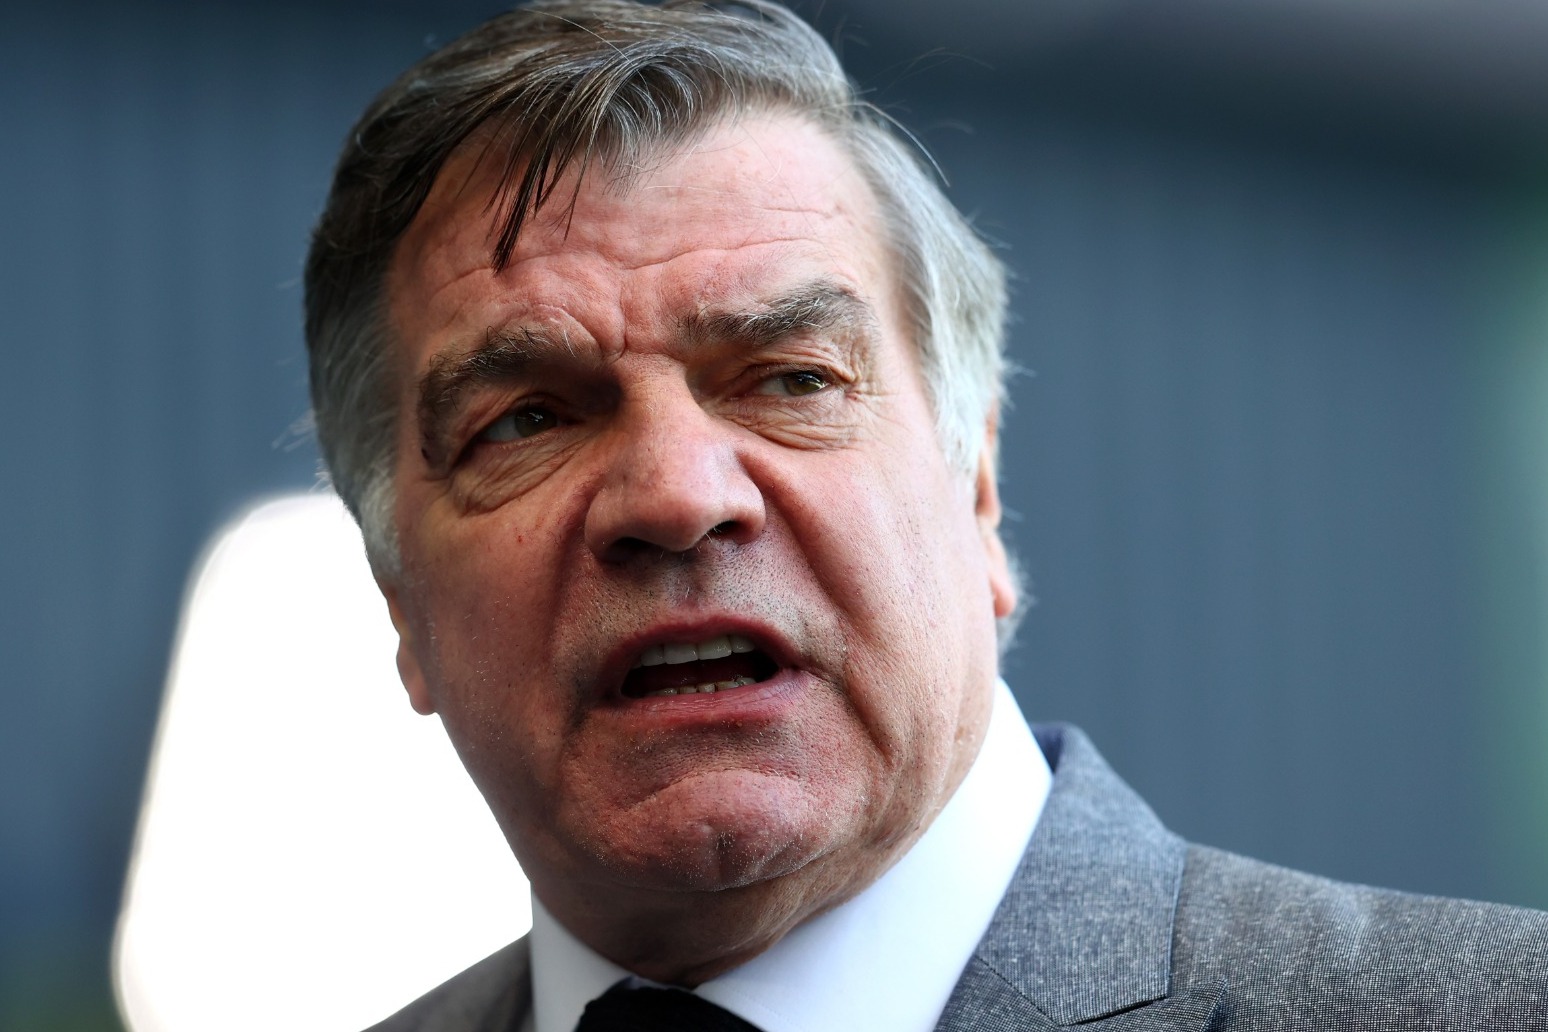 Sam Allardyce leaving West Brom because he sees himself as a short-term manager 